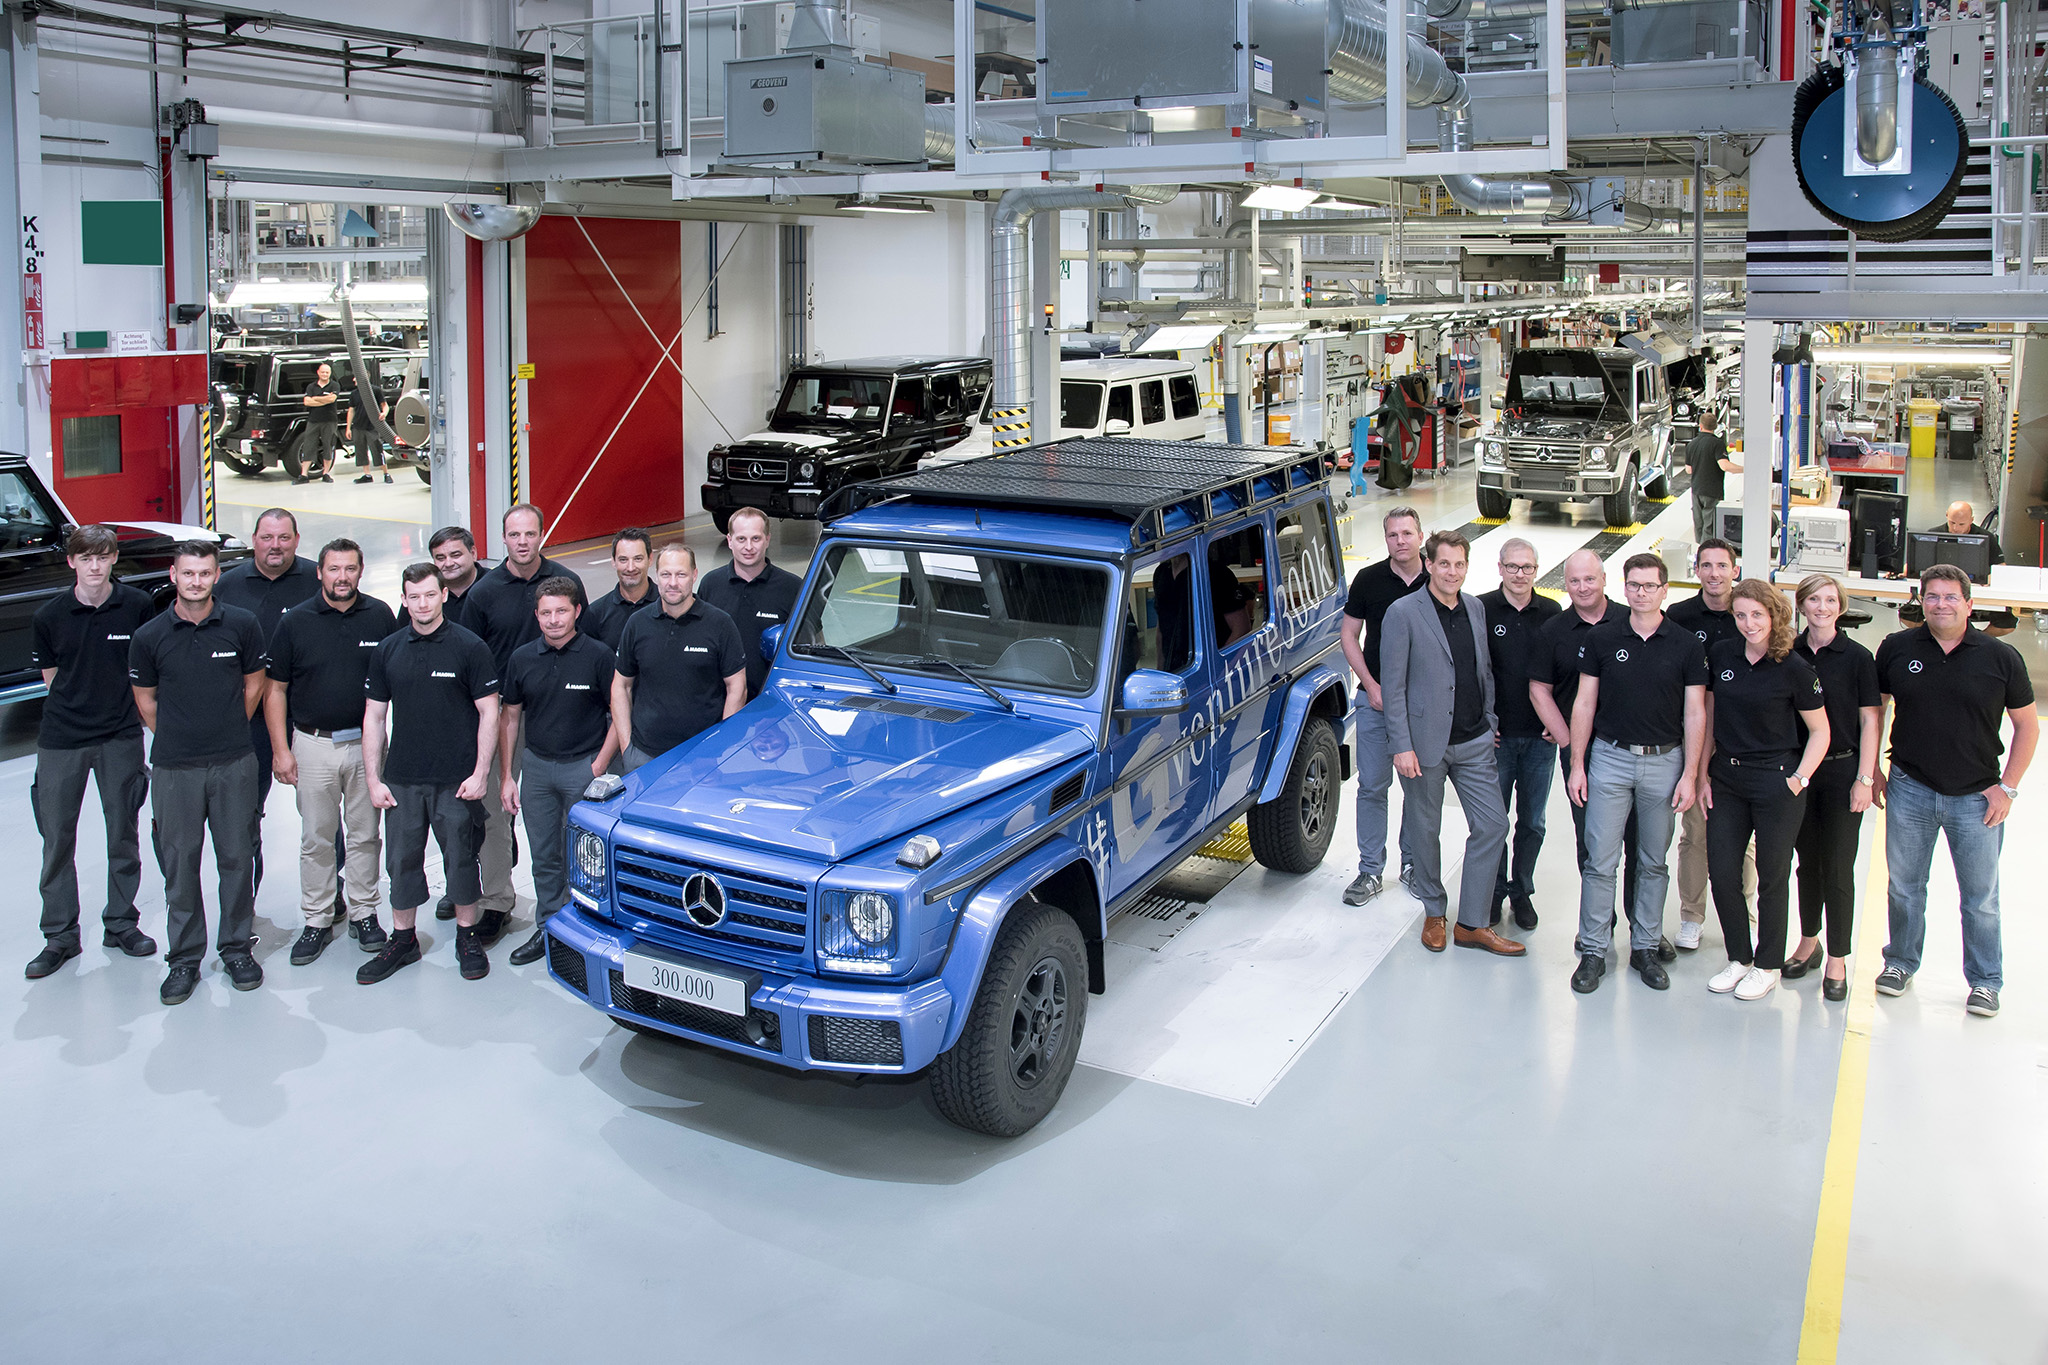 Number 300,000 Mercedes G-Class Special Edition